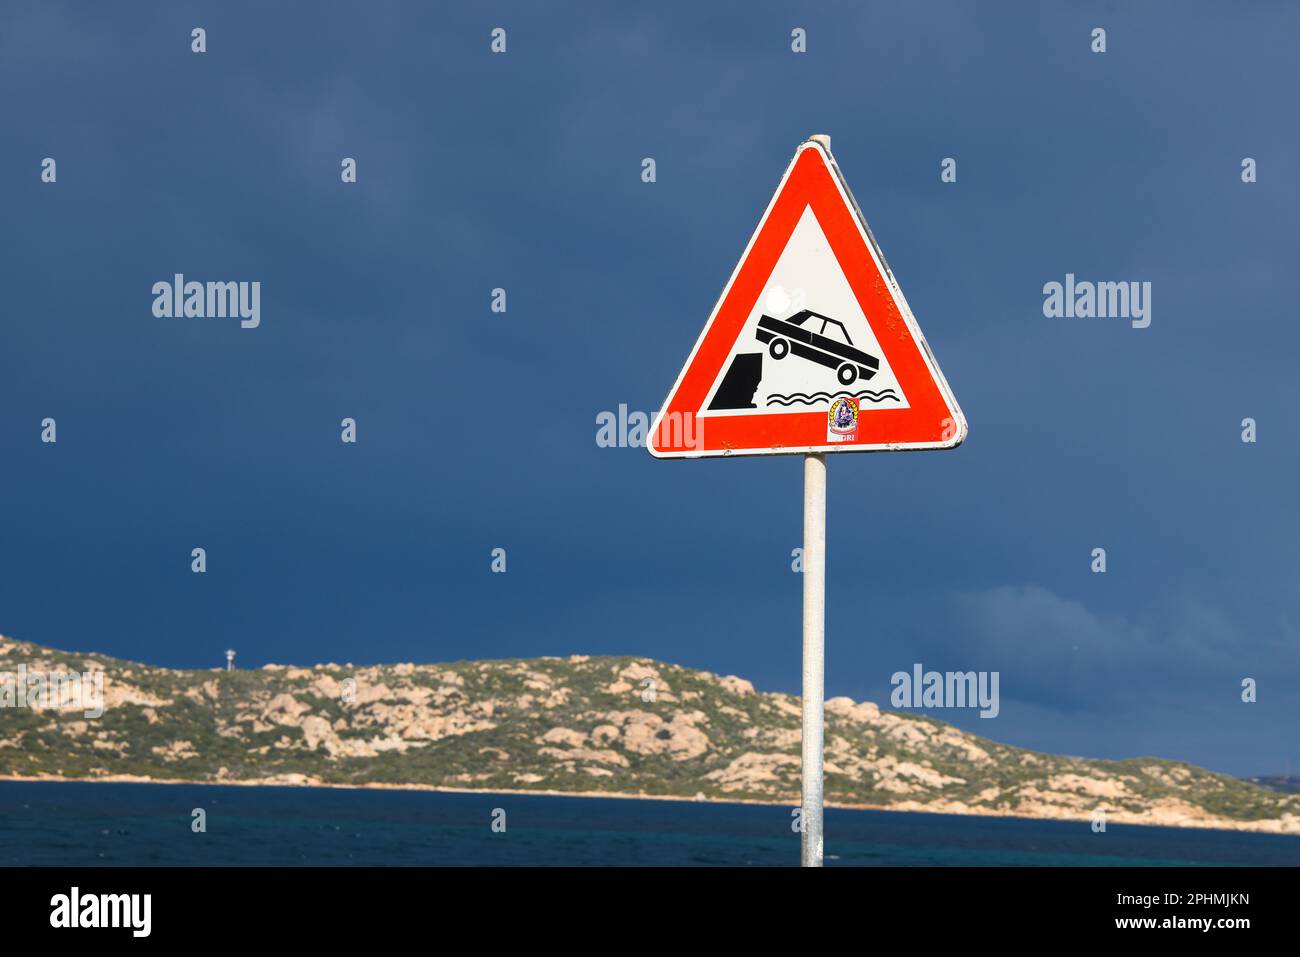 Warning triangle traffic sign of unprotected quayside and danger falling into water - Italy, Sardinia, Europe 2023.03.20 Stock Photo